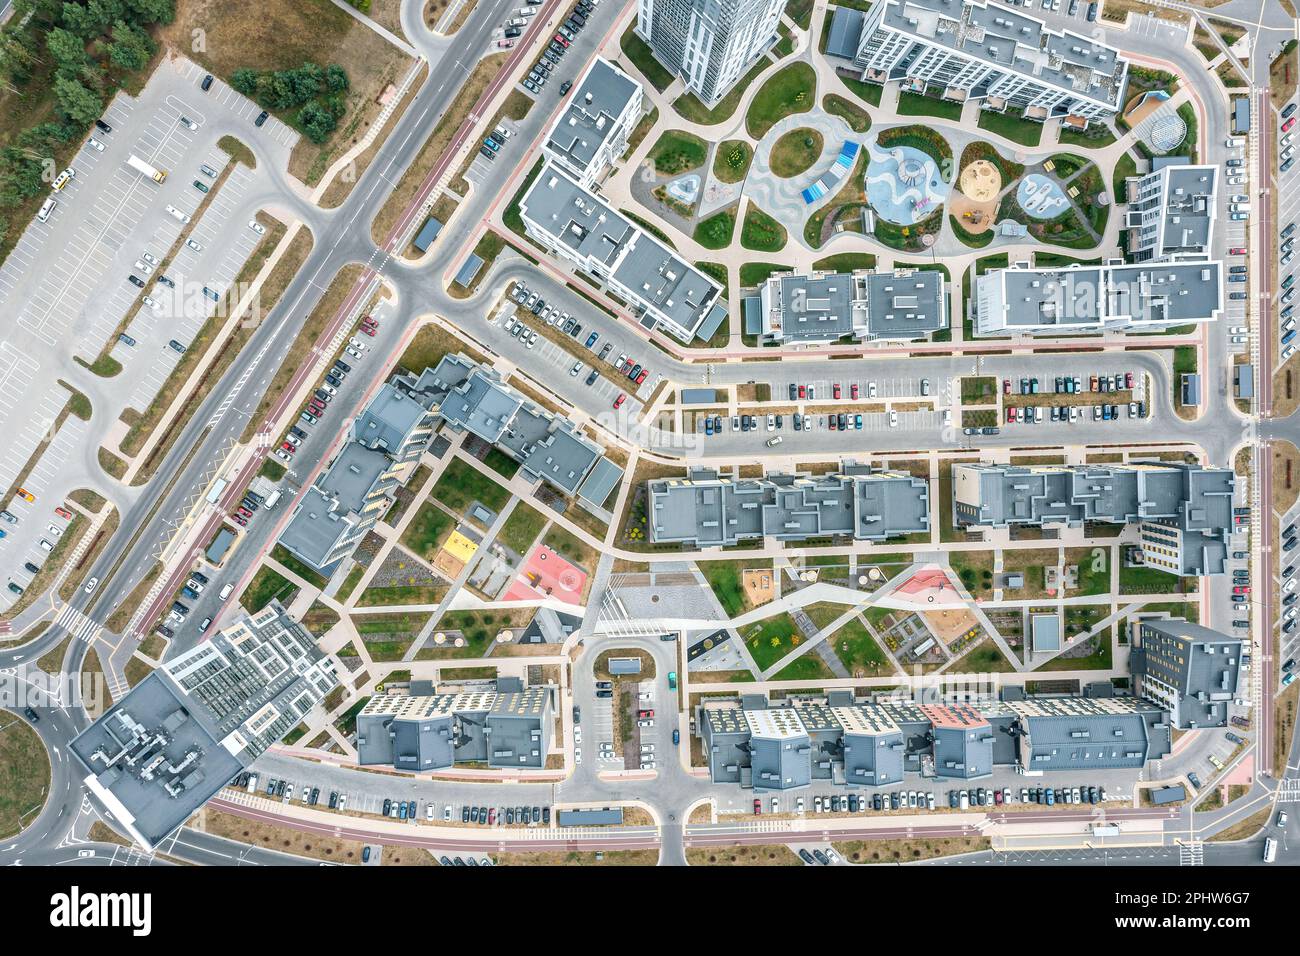 new residential district. multistory apartment houses with children playgrounds. aerial view. Stock Photo